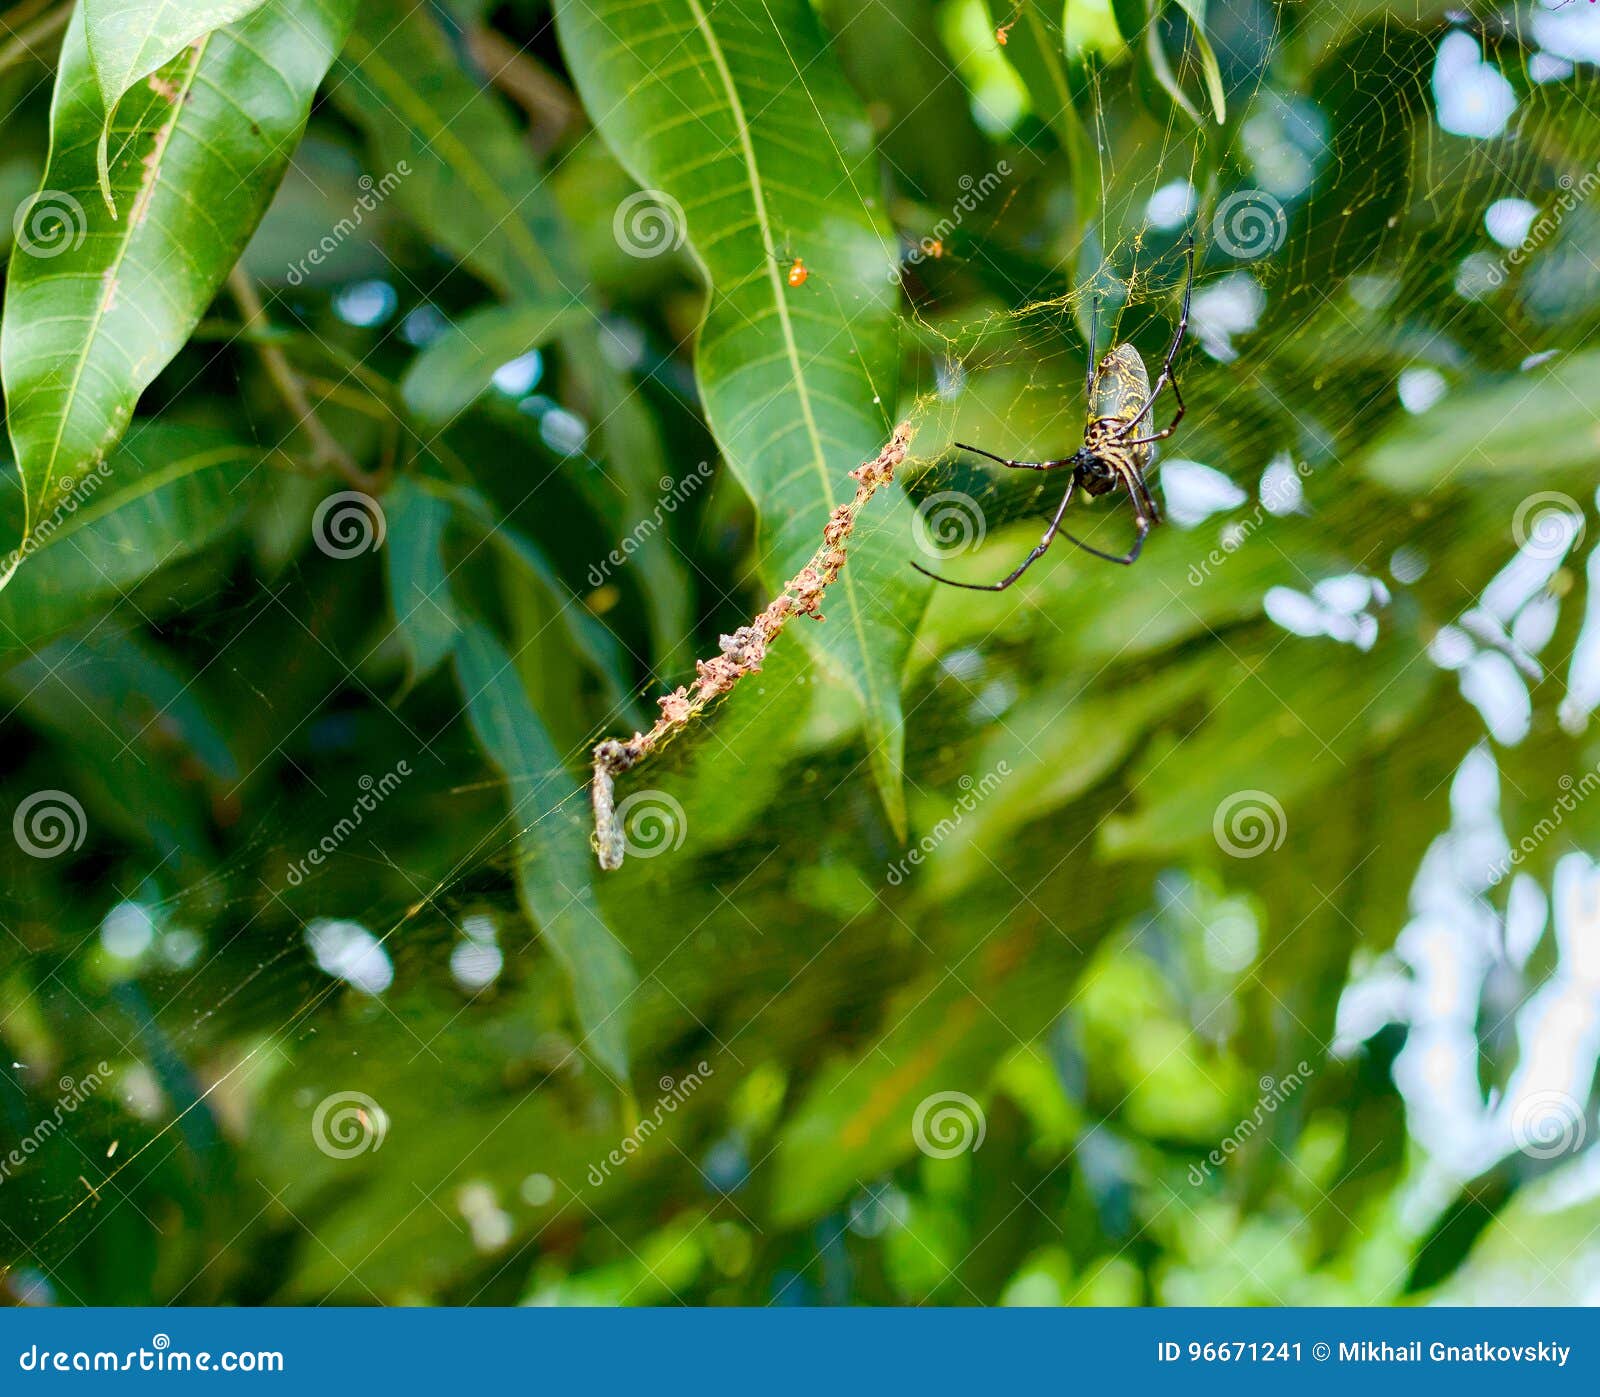 image of batik golden web spider nephila antipodiana in the net. insect animal.